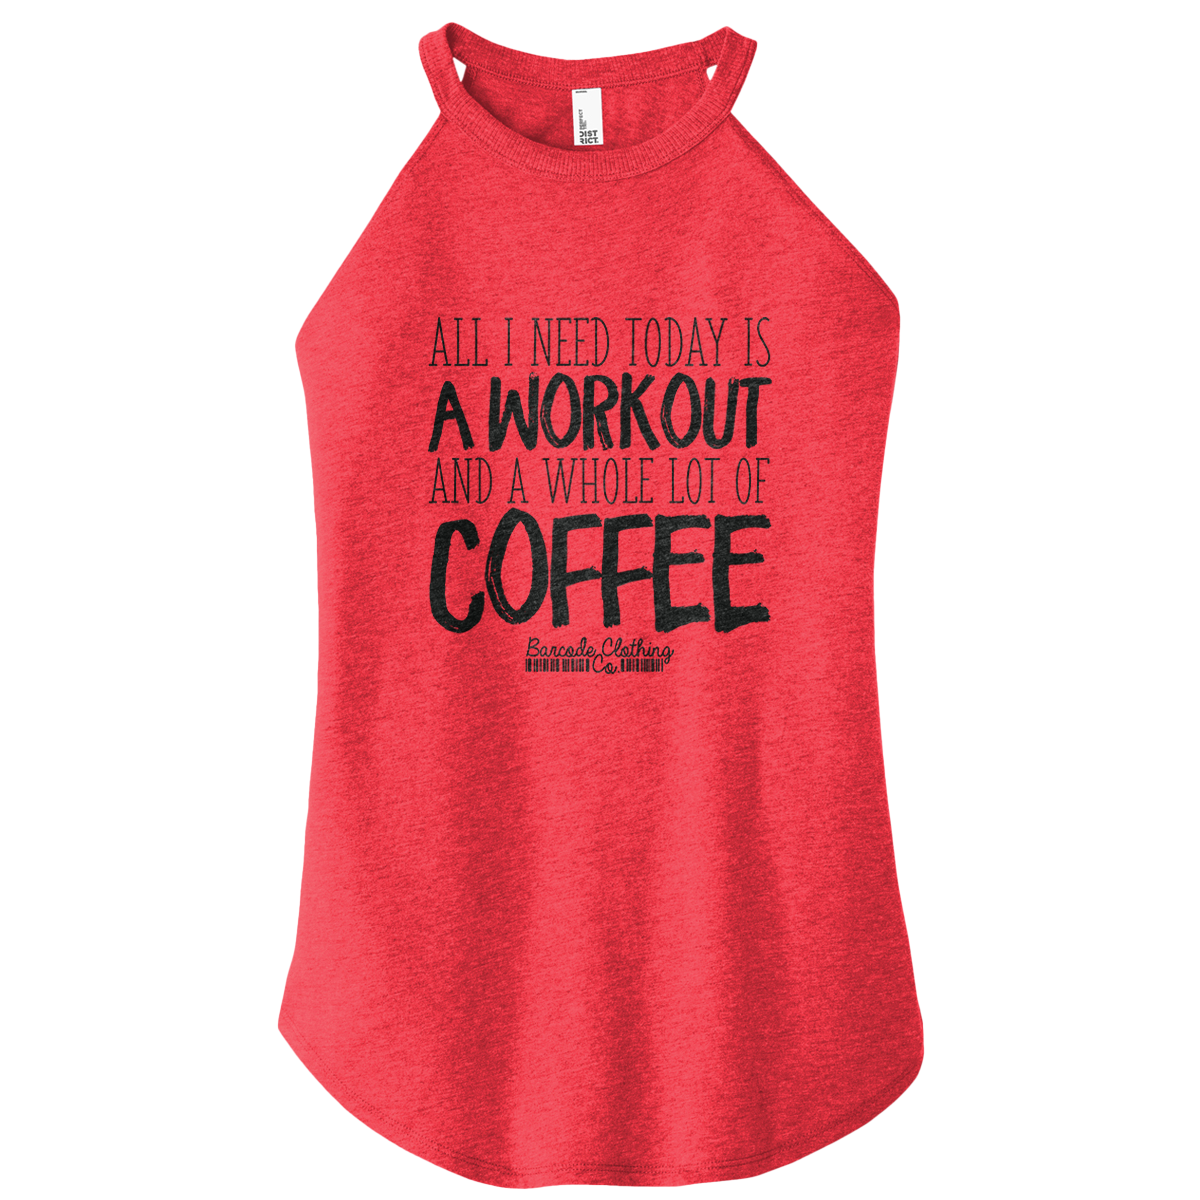 All I Need Today Is a Workout Coffee Rocker Tank